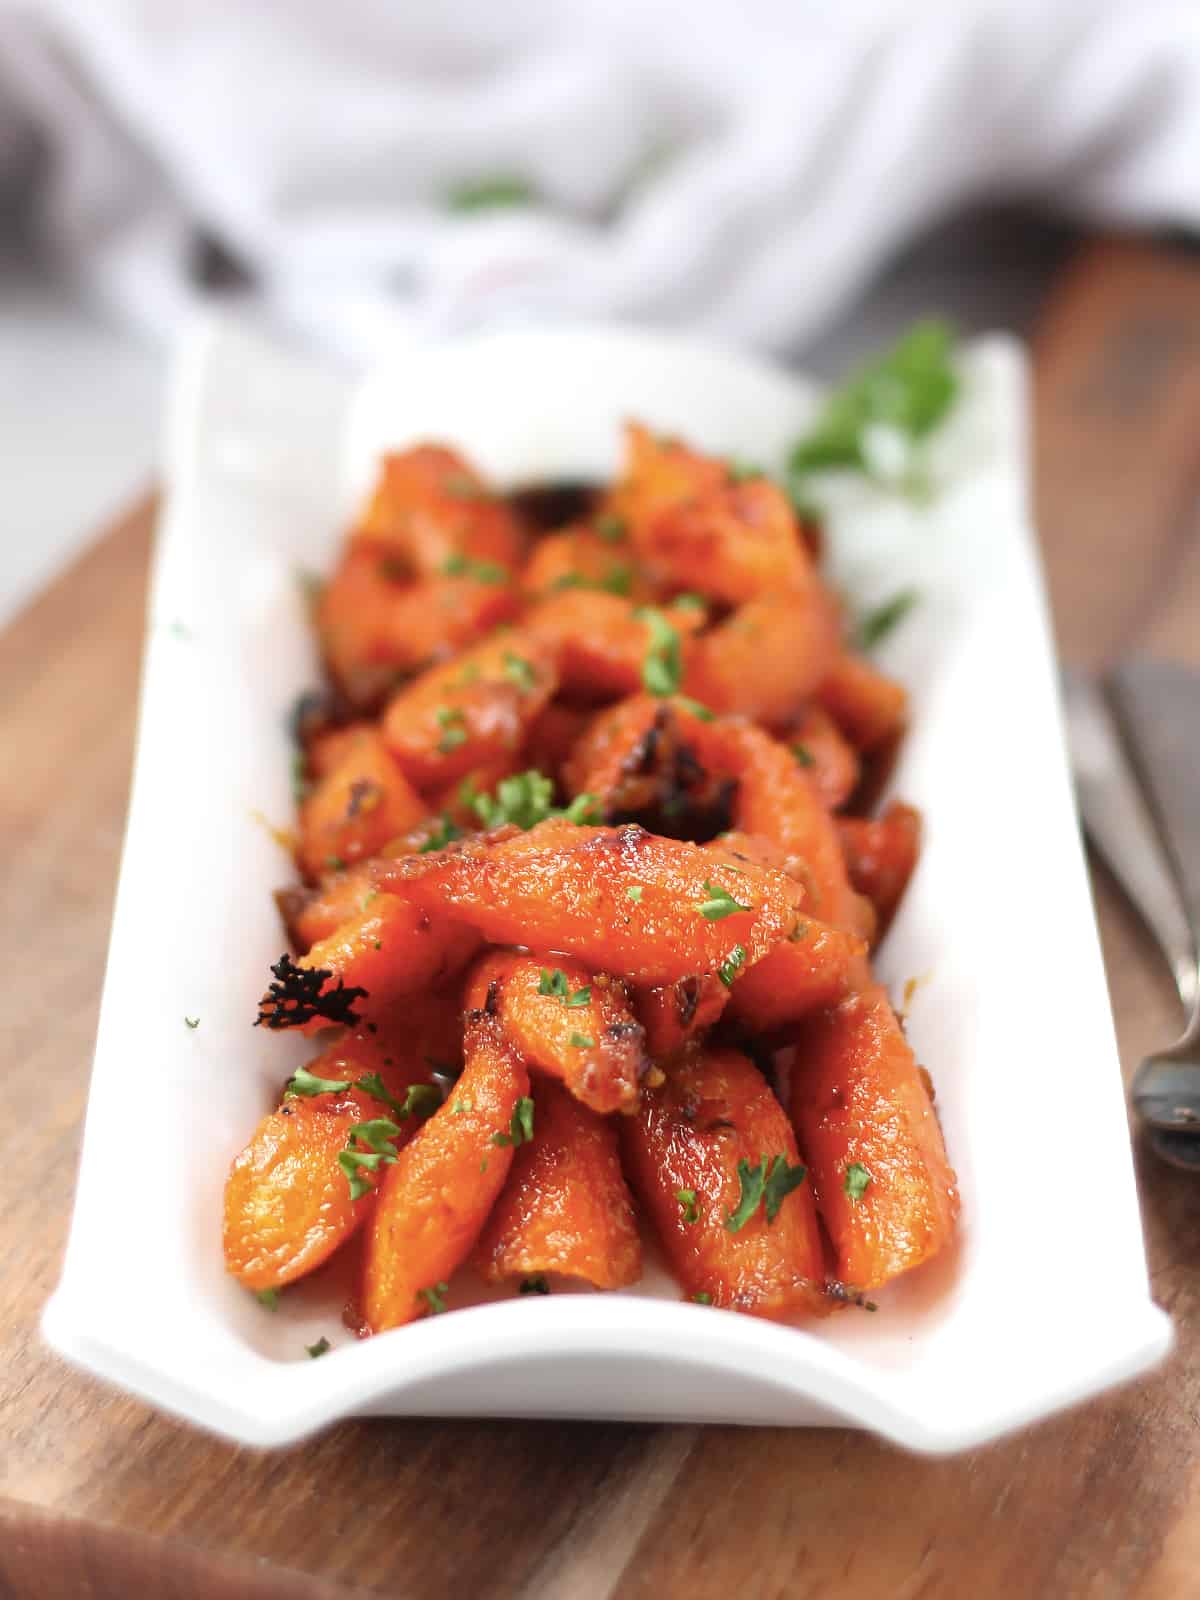 Maple mustard glazed carrots on a white serving plate.